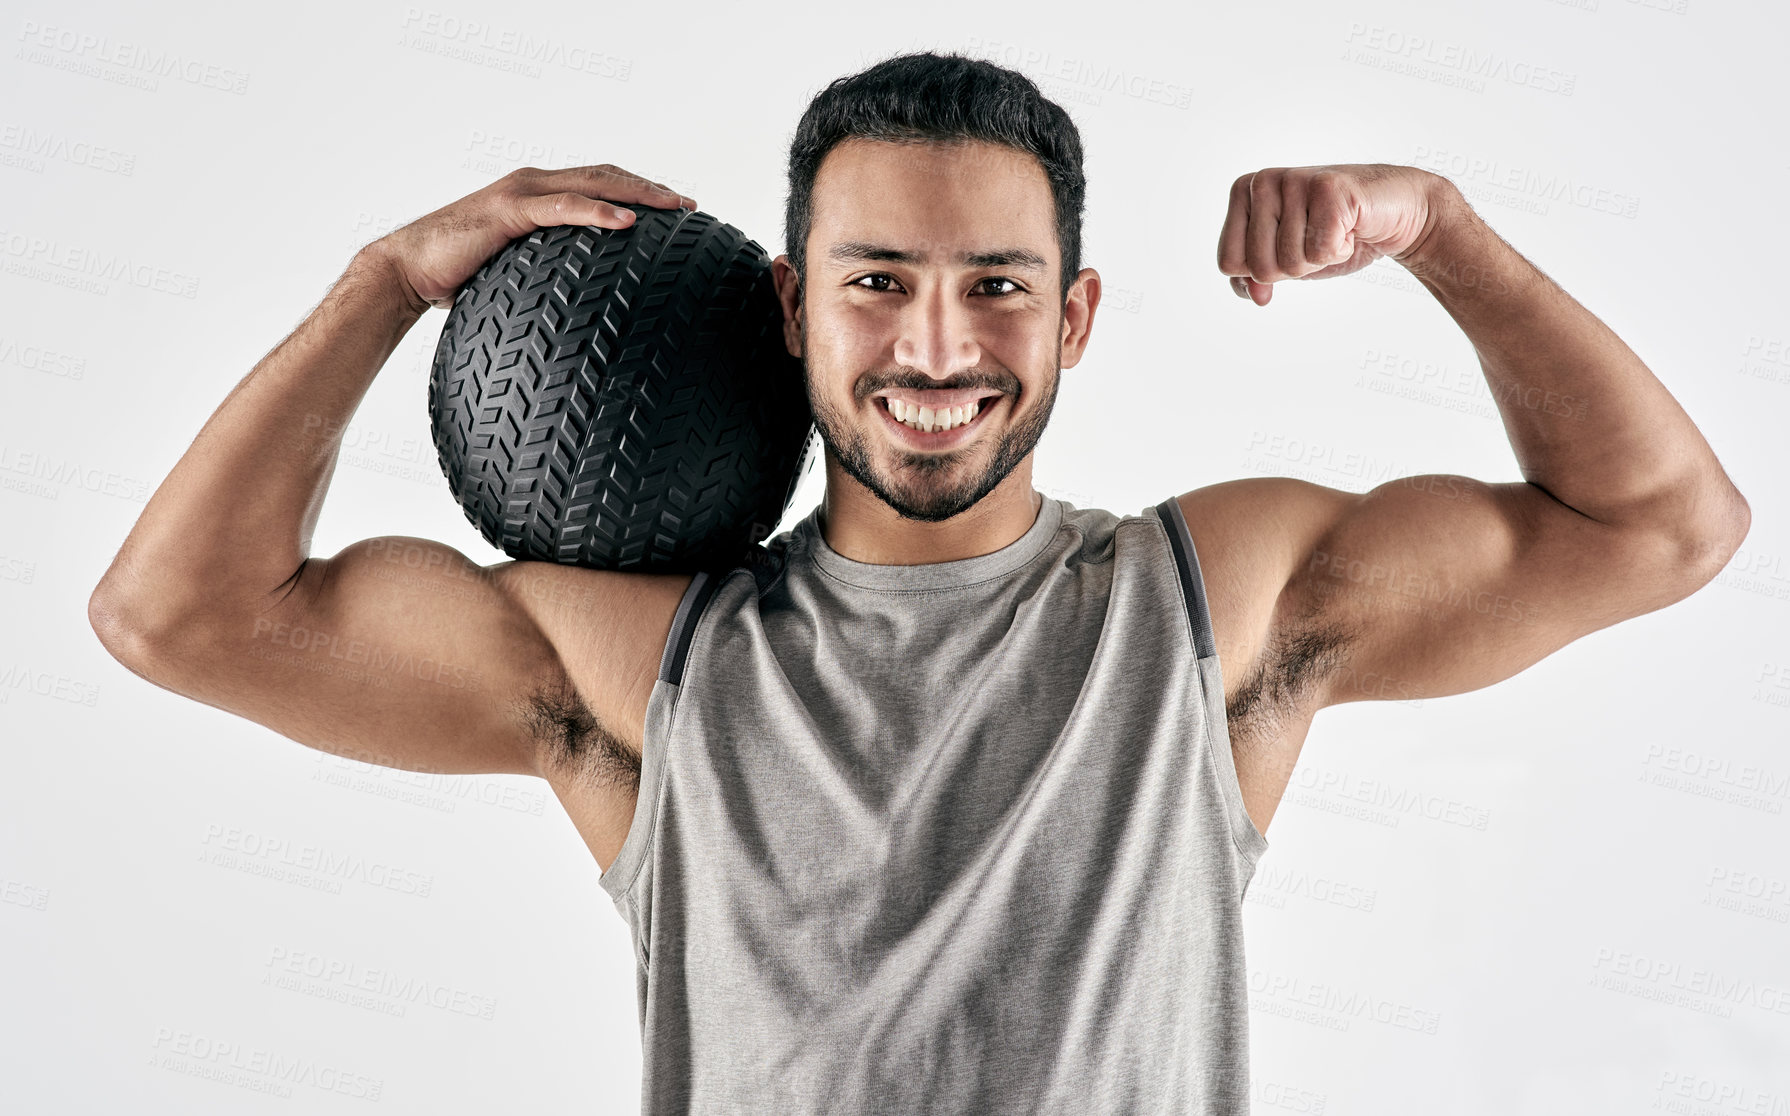 Buy stock photo Studio portrait of a muscular young man flexing while holding an exercise ball against a white background